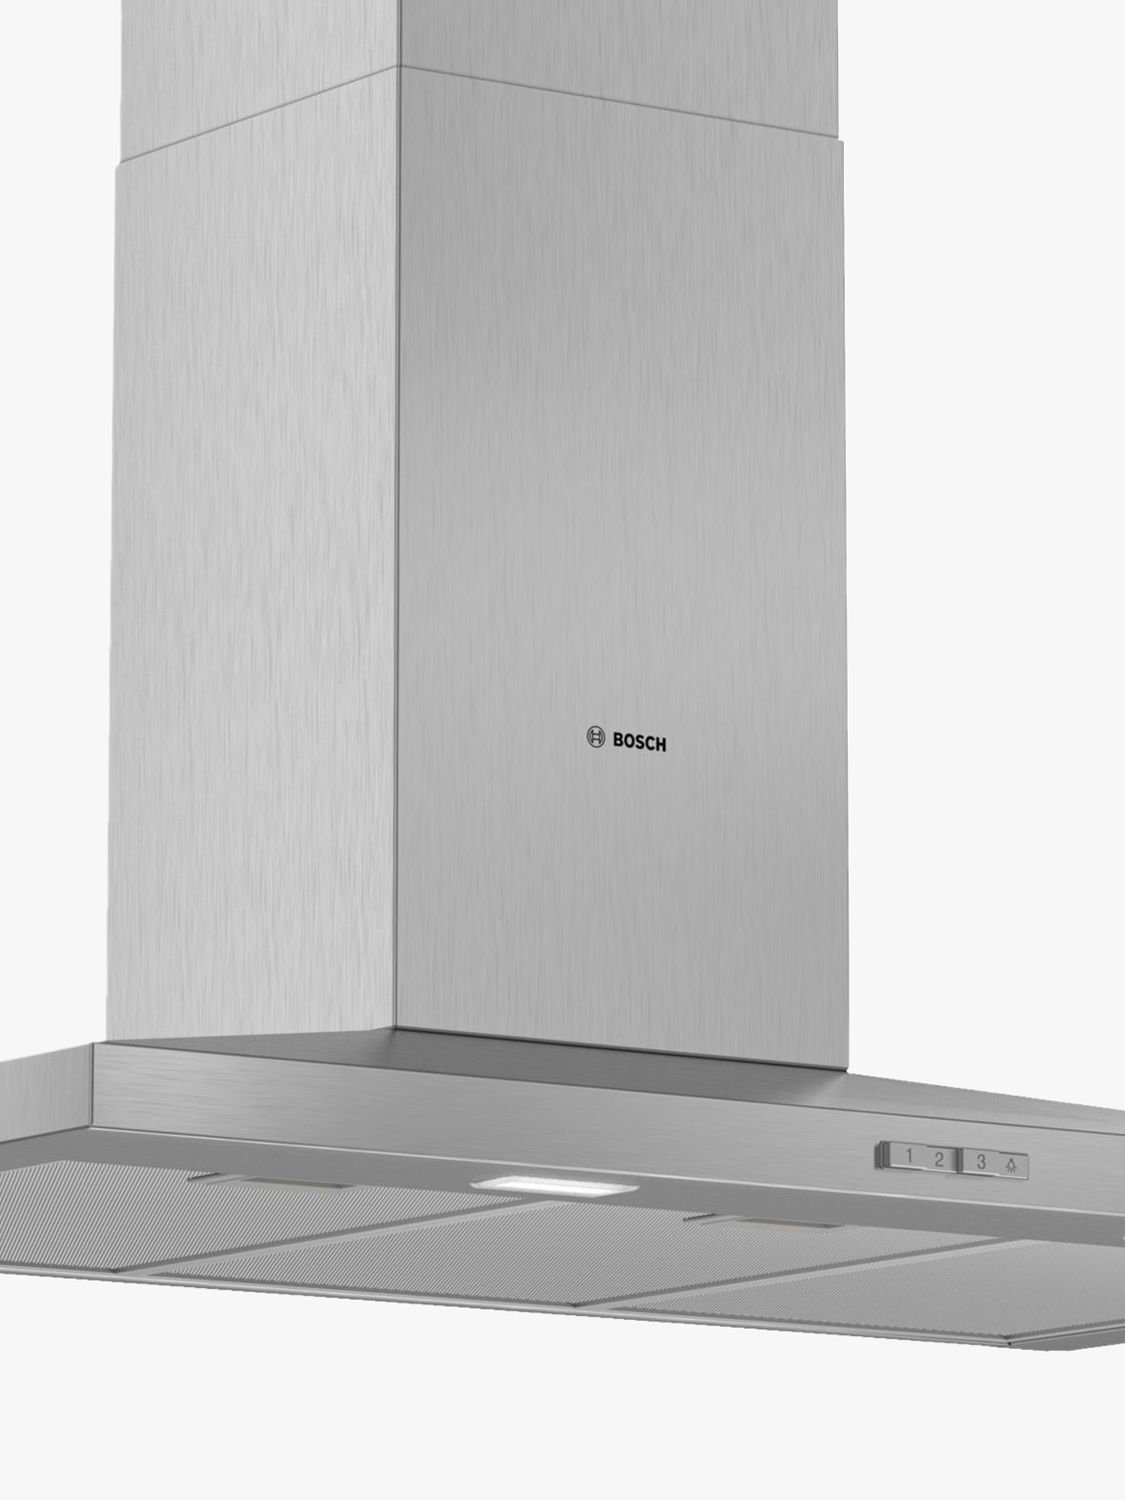 Bosch DWQ94BC50B Pyramid Chimney Cooker Hood, Stainless Steel